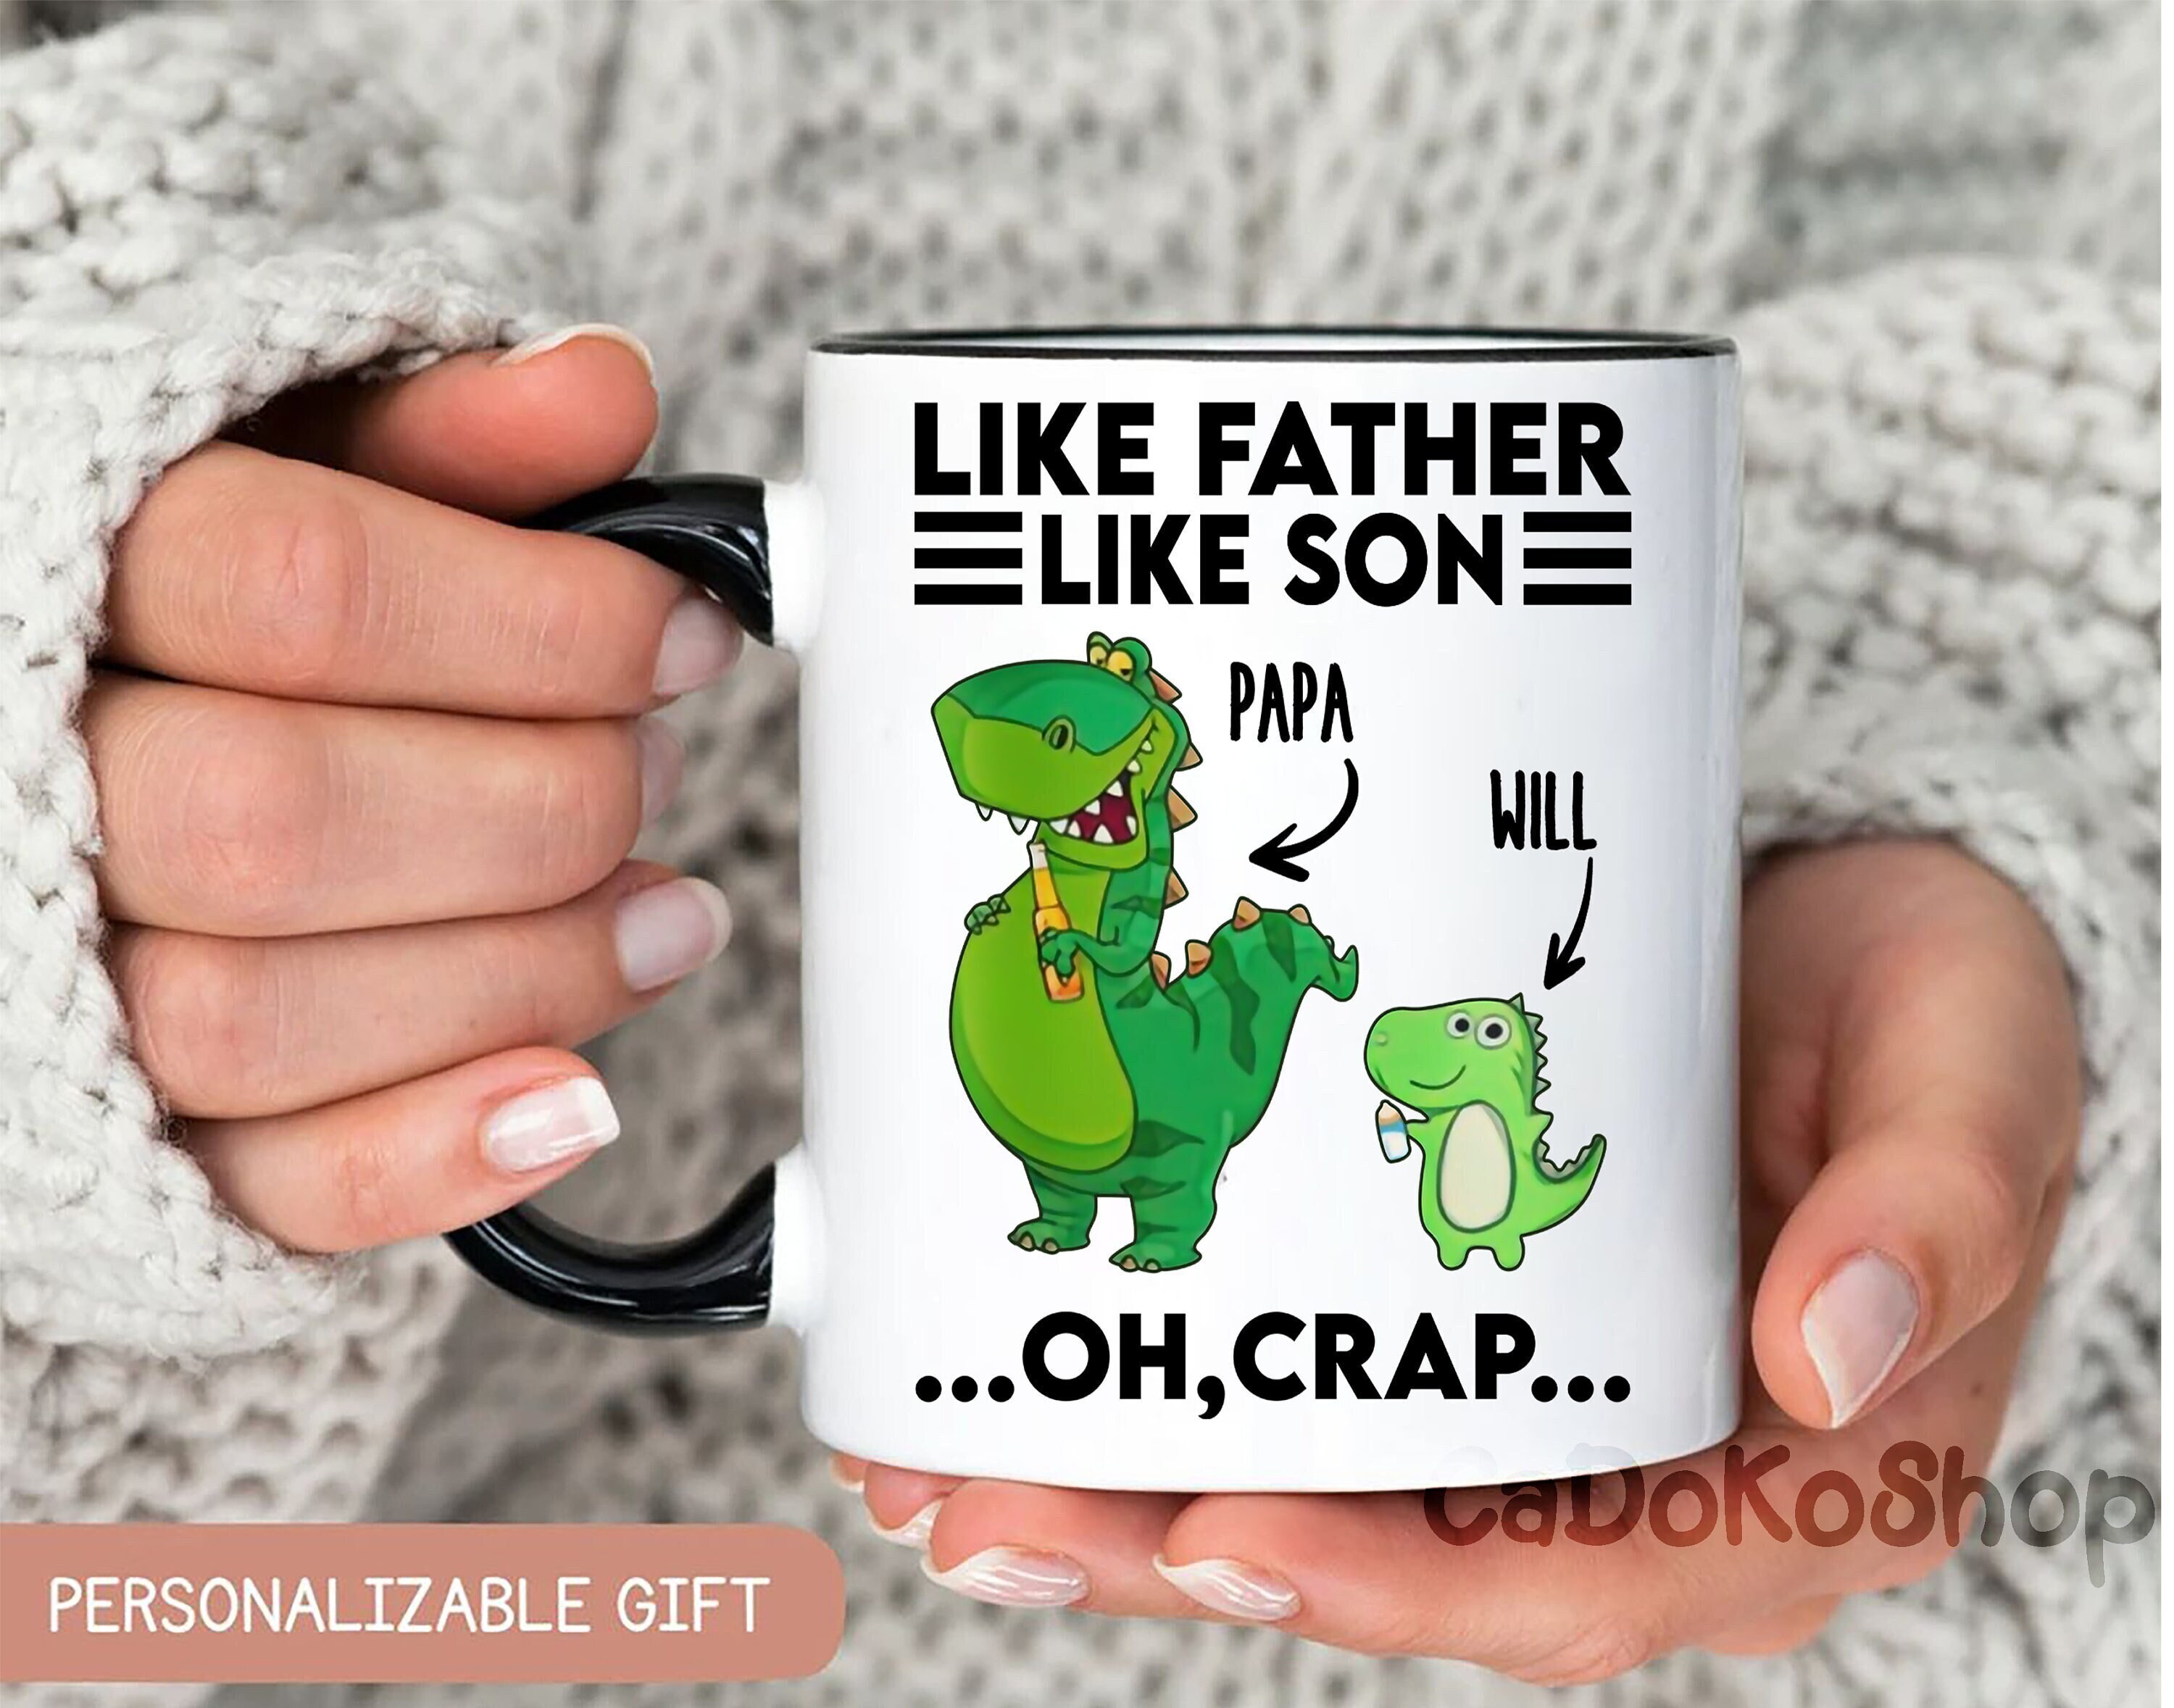 Dadasaurus Dinosaur Like A Normal Dad But More Roarsome 10oz Mug Cup  Birthday Love Family Funny Best Fathers Day Awesome Dad